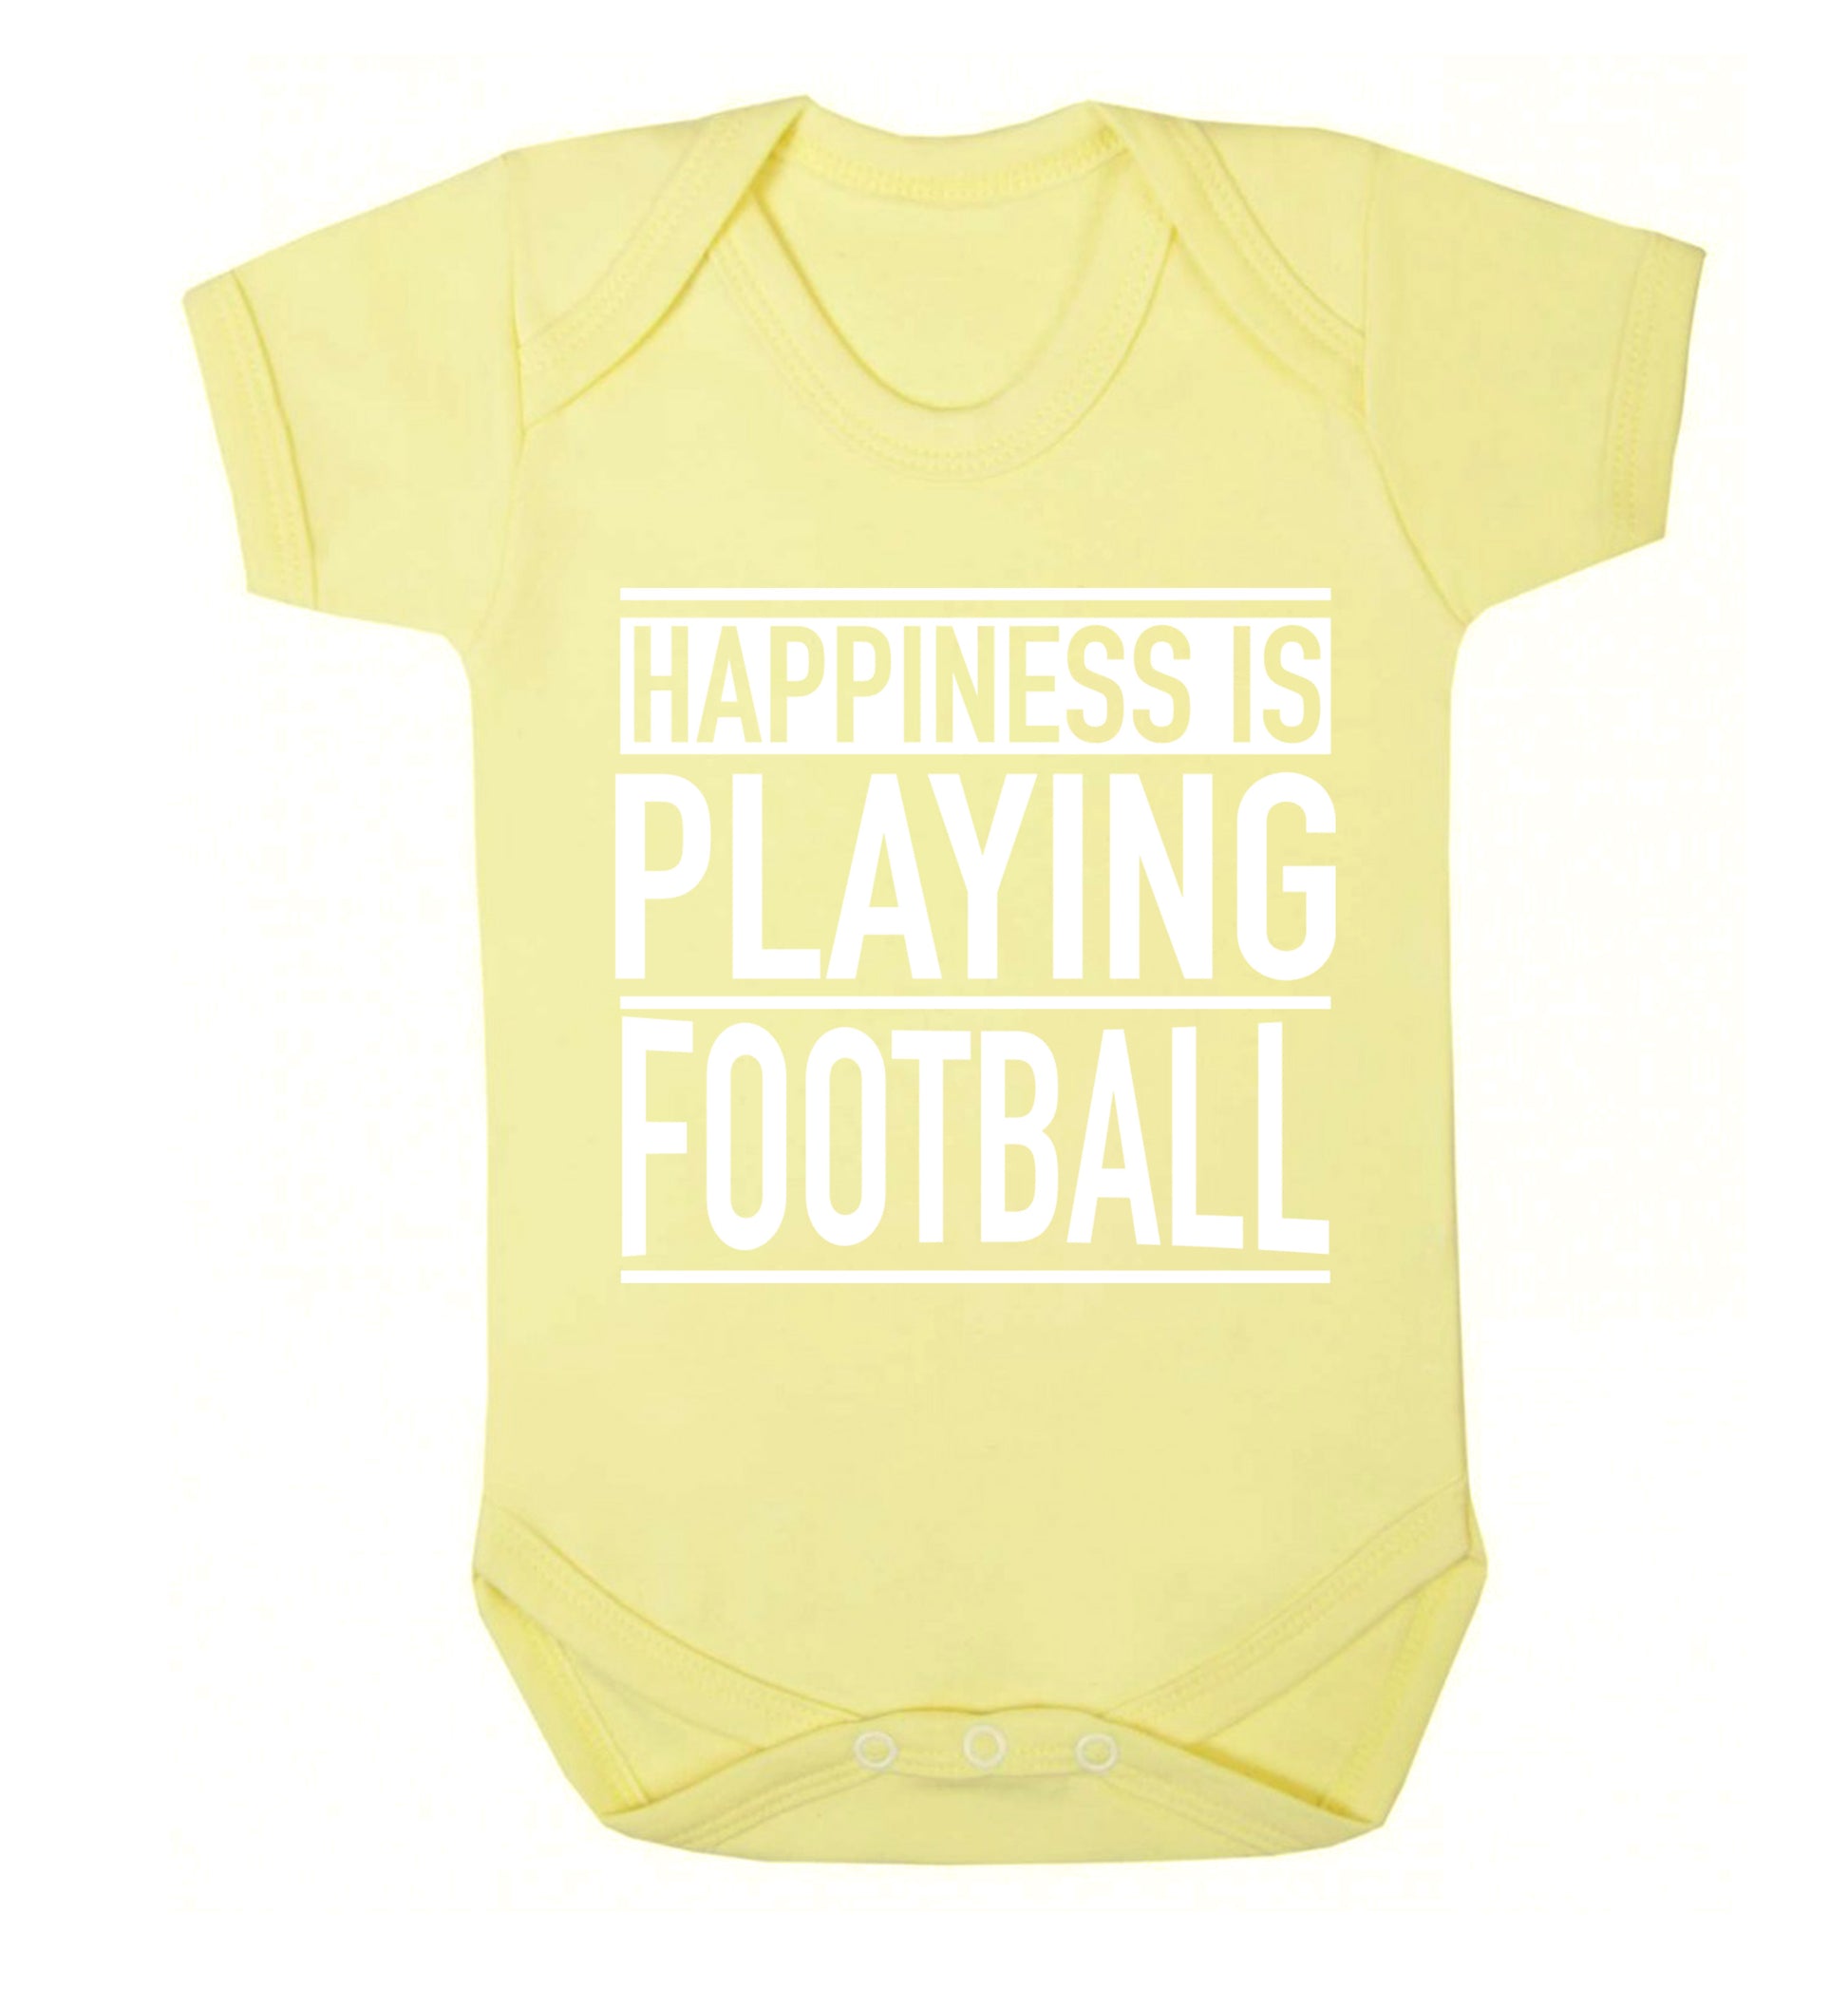 Happiness is playing football Baby Vest pale yellow 18-24 months